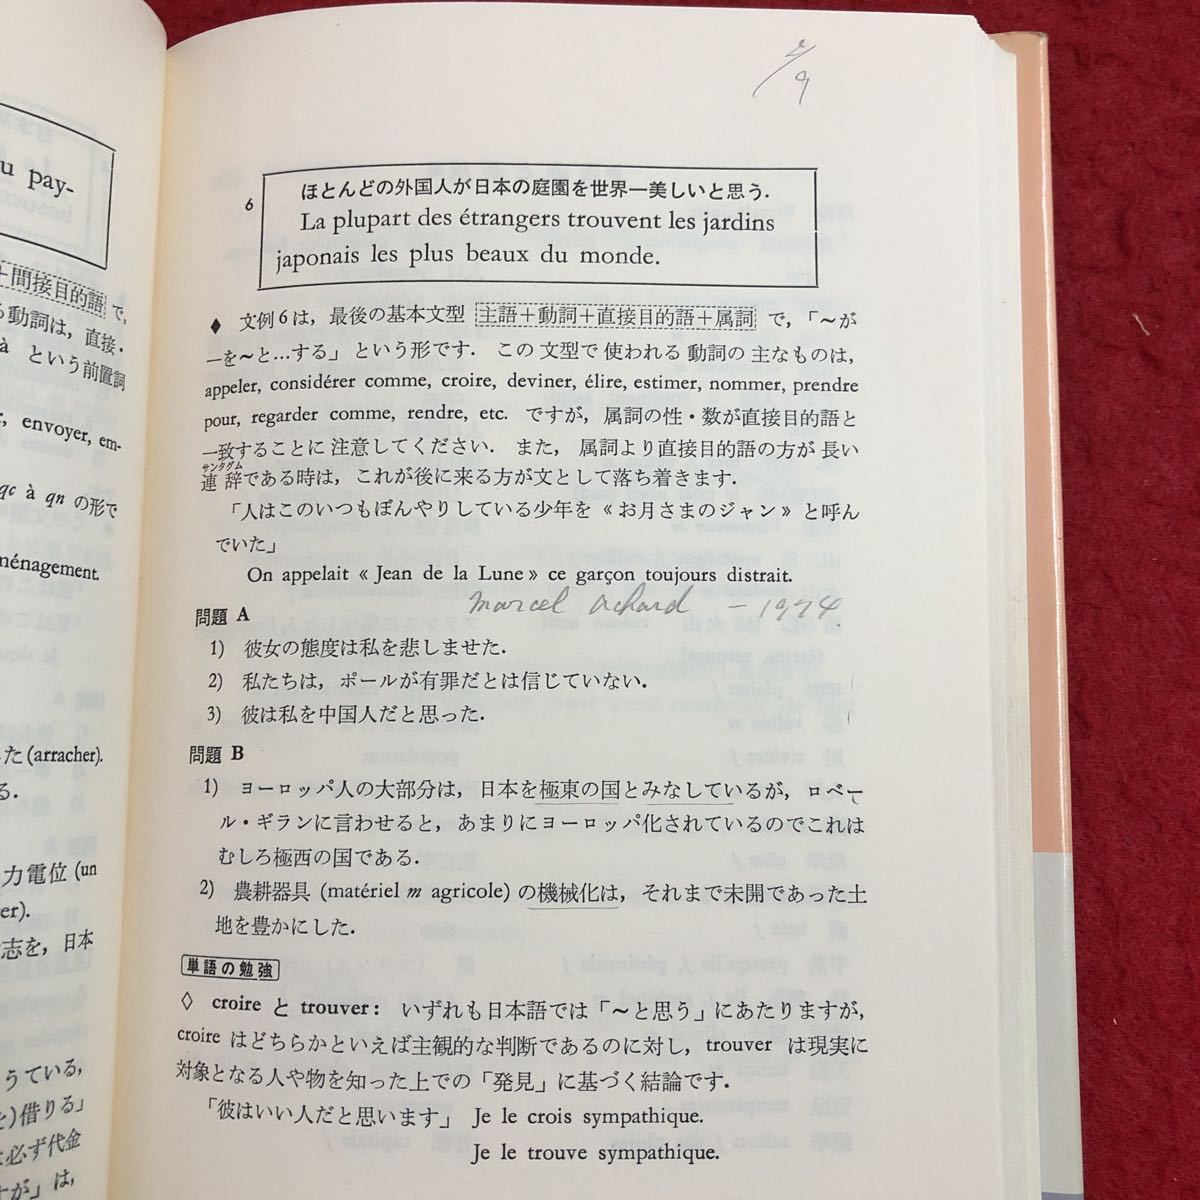 M6e-033 standard French course 3 composition author Fukui . man etc. 1992 year 9 month 10 day 18 version issue large . pavilion bookstore French teaching material grammar single language table reality life 